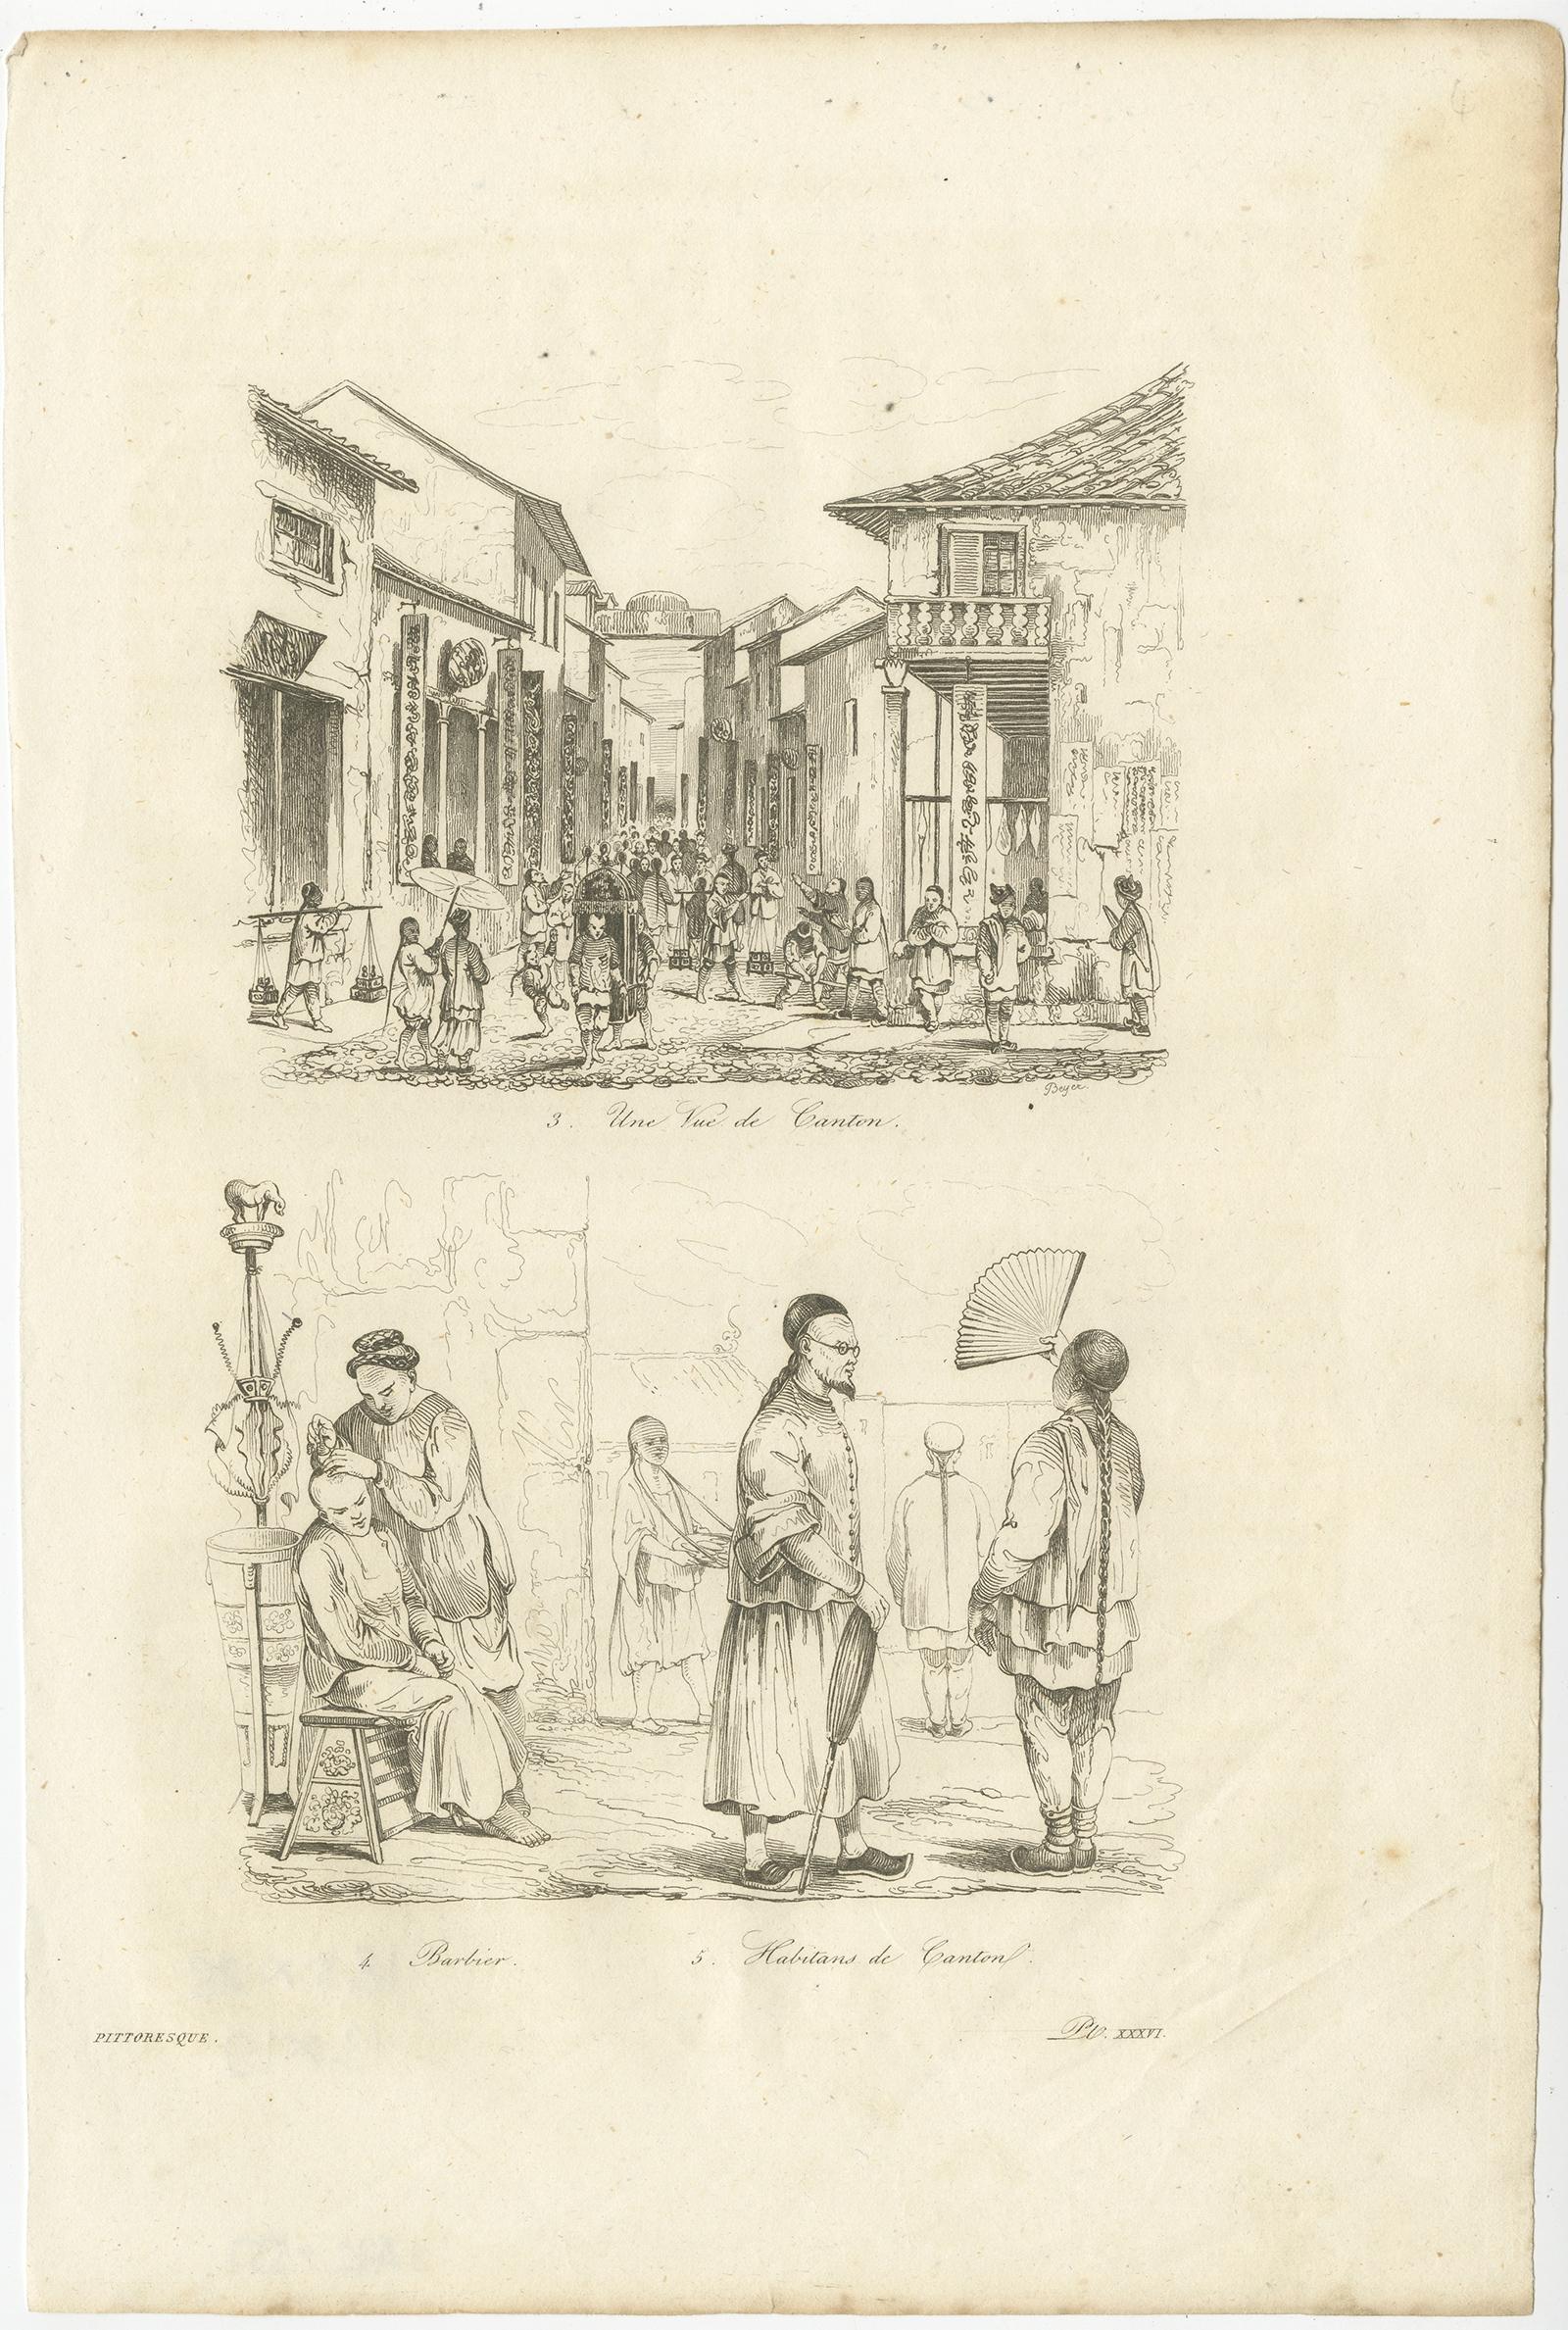 Antique print titled 'Une Rue de Canton - Barbier - Habitans de Canton'. 

View of a street in Guangzhou (Canton) and inhabitants of Guangzhou, also includes a small image of a Chinese barber. This print originates from 'Voyage pittoresque autour